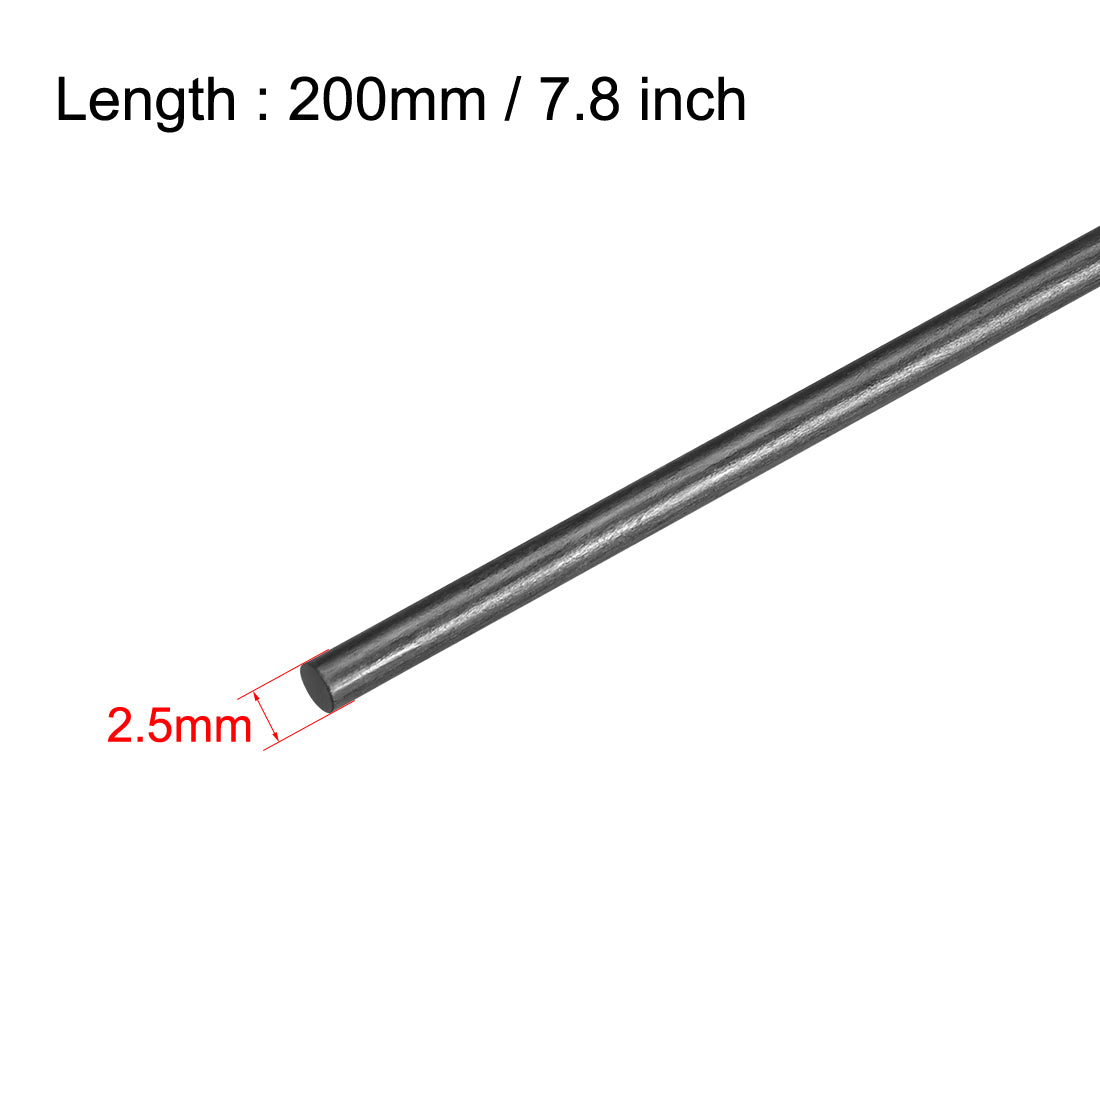 uxcell Uxcell 2.5mm Carbon Fiber Round Rod for DIY Project  200mm 7.8 inch, 10pcs